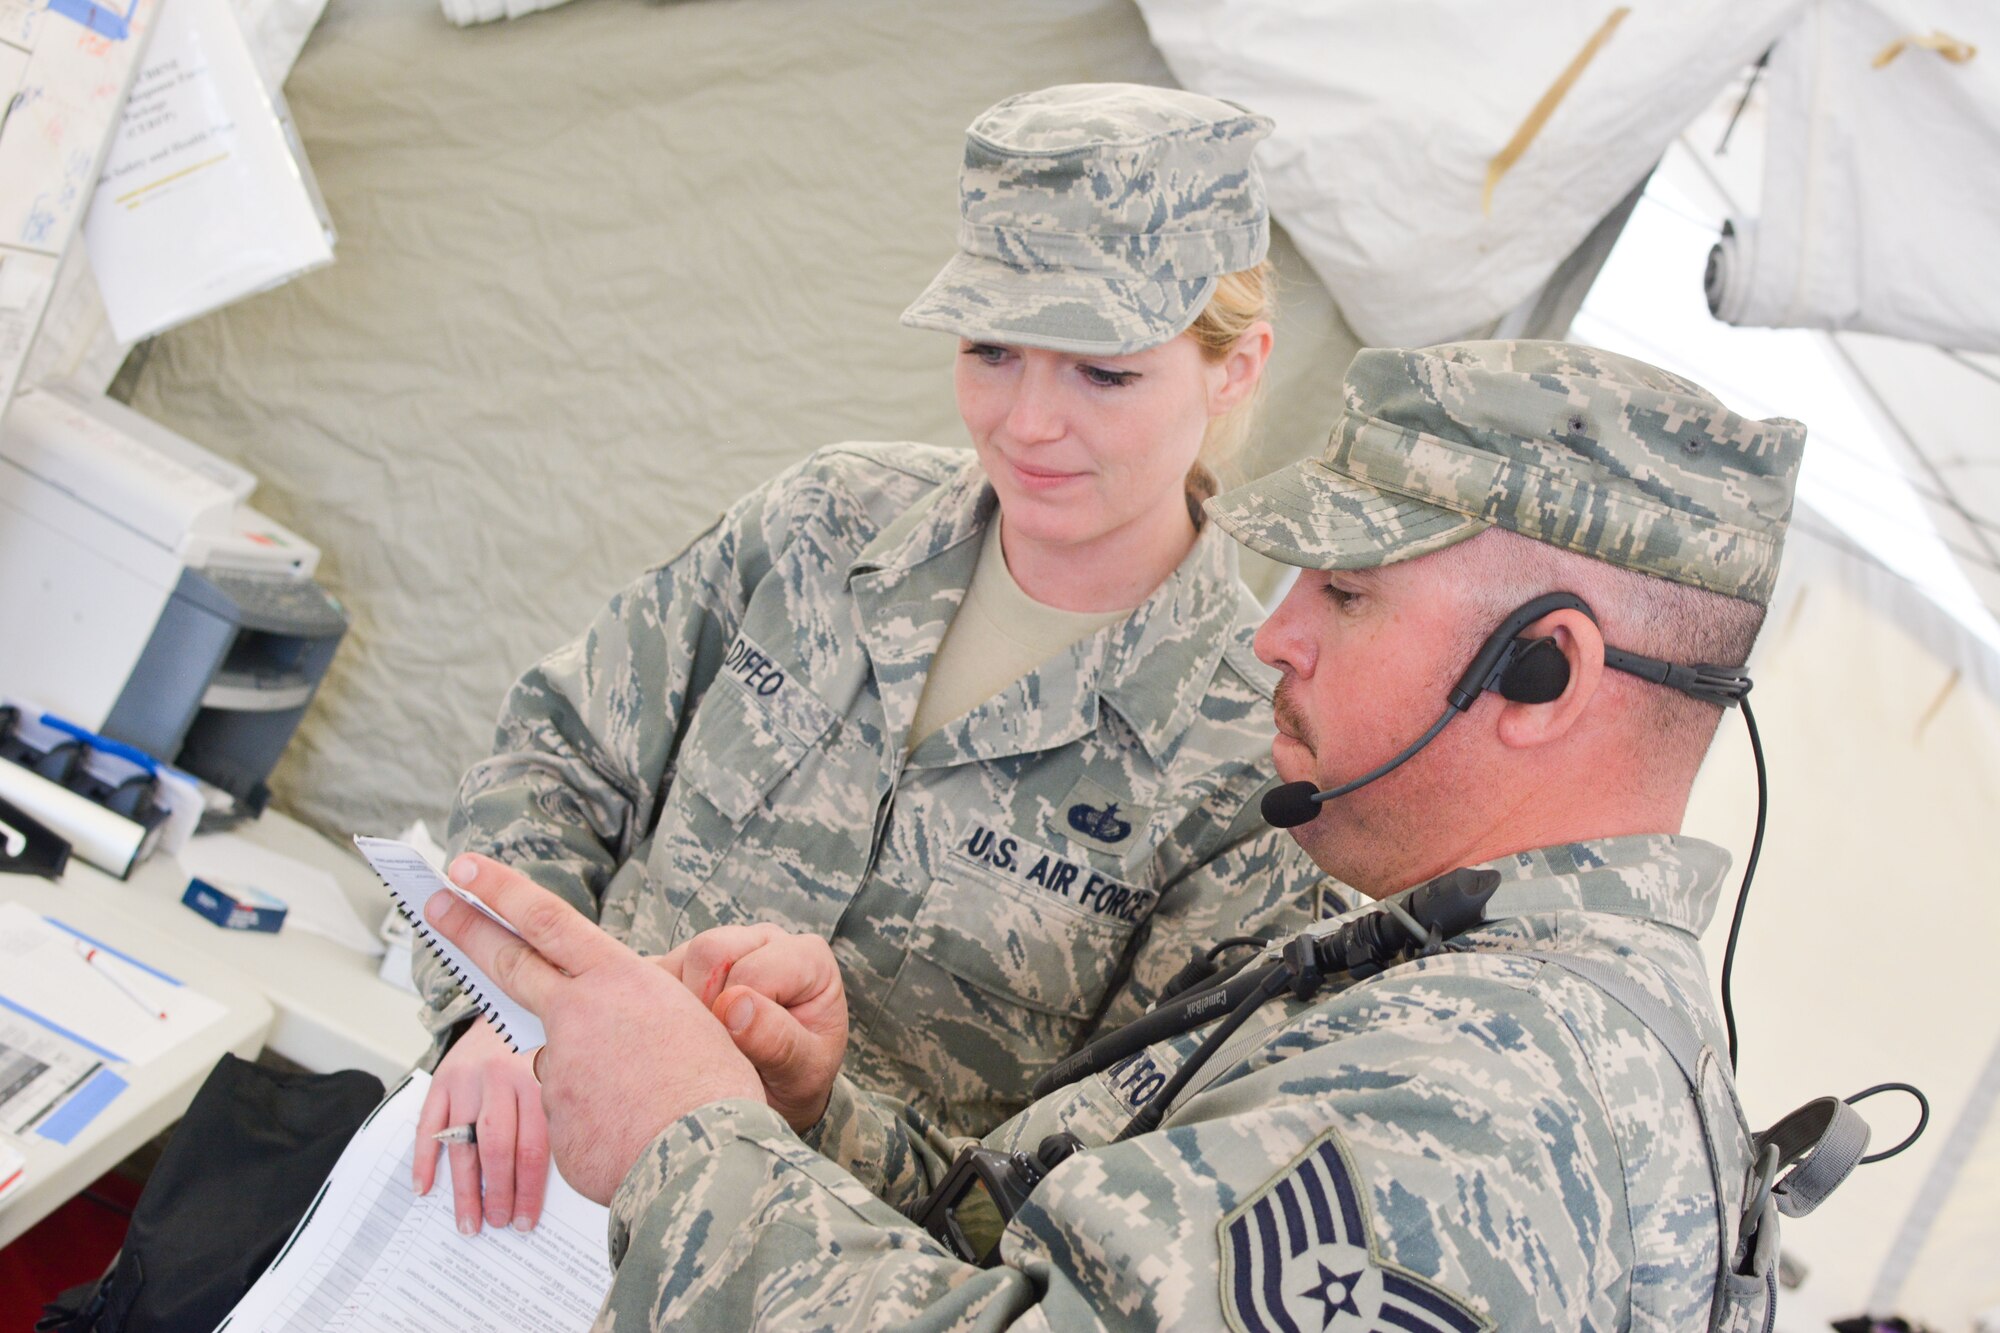 U.S. Airmen assigned to the Missouri National Guard’s Homeland Response Force (HRF) transport a mock patient March 20, 2015 at Camp Gruber in Braggs, Okla. The guardsmen were evaluated on their ability to respond to a large scale natural disaster or terrorist attack. HRFs are validated every three years. (U.S. Air National Guard photo by Tech. Sgt. Michael Crane)